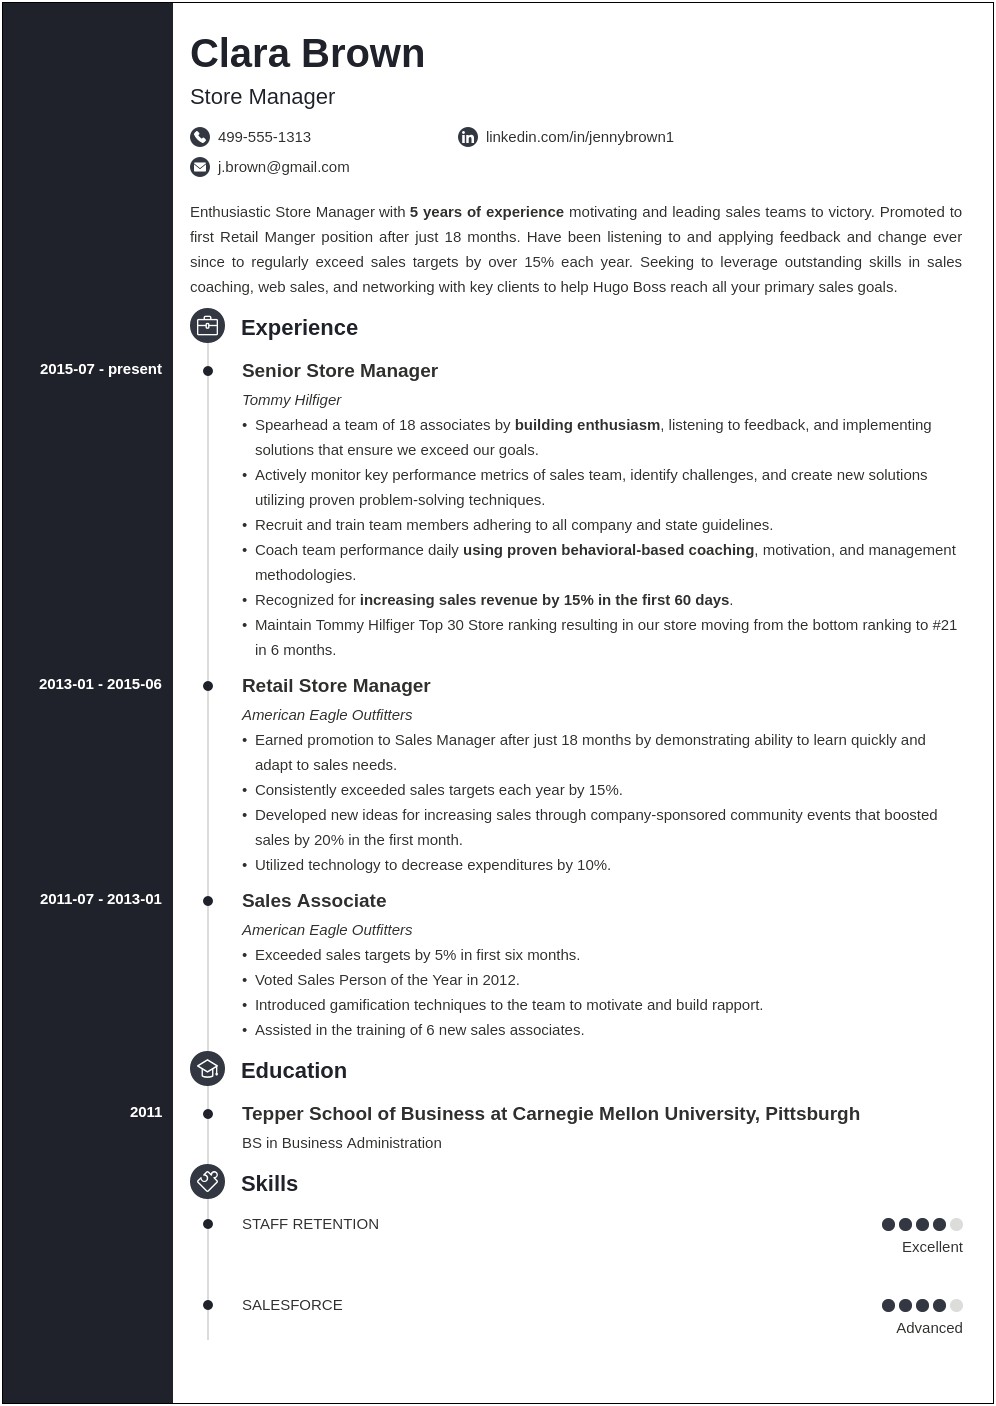 Resume For Store Manager At Rent A Center